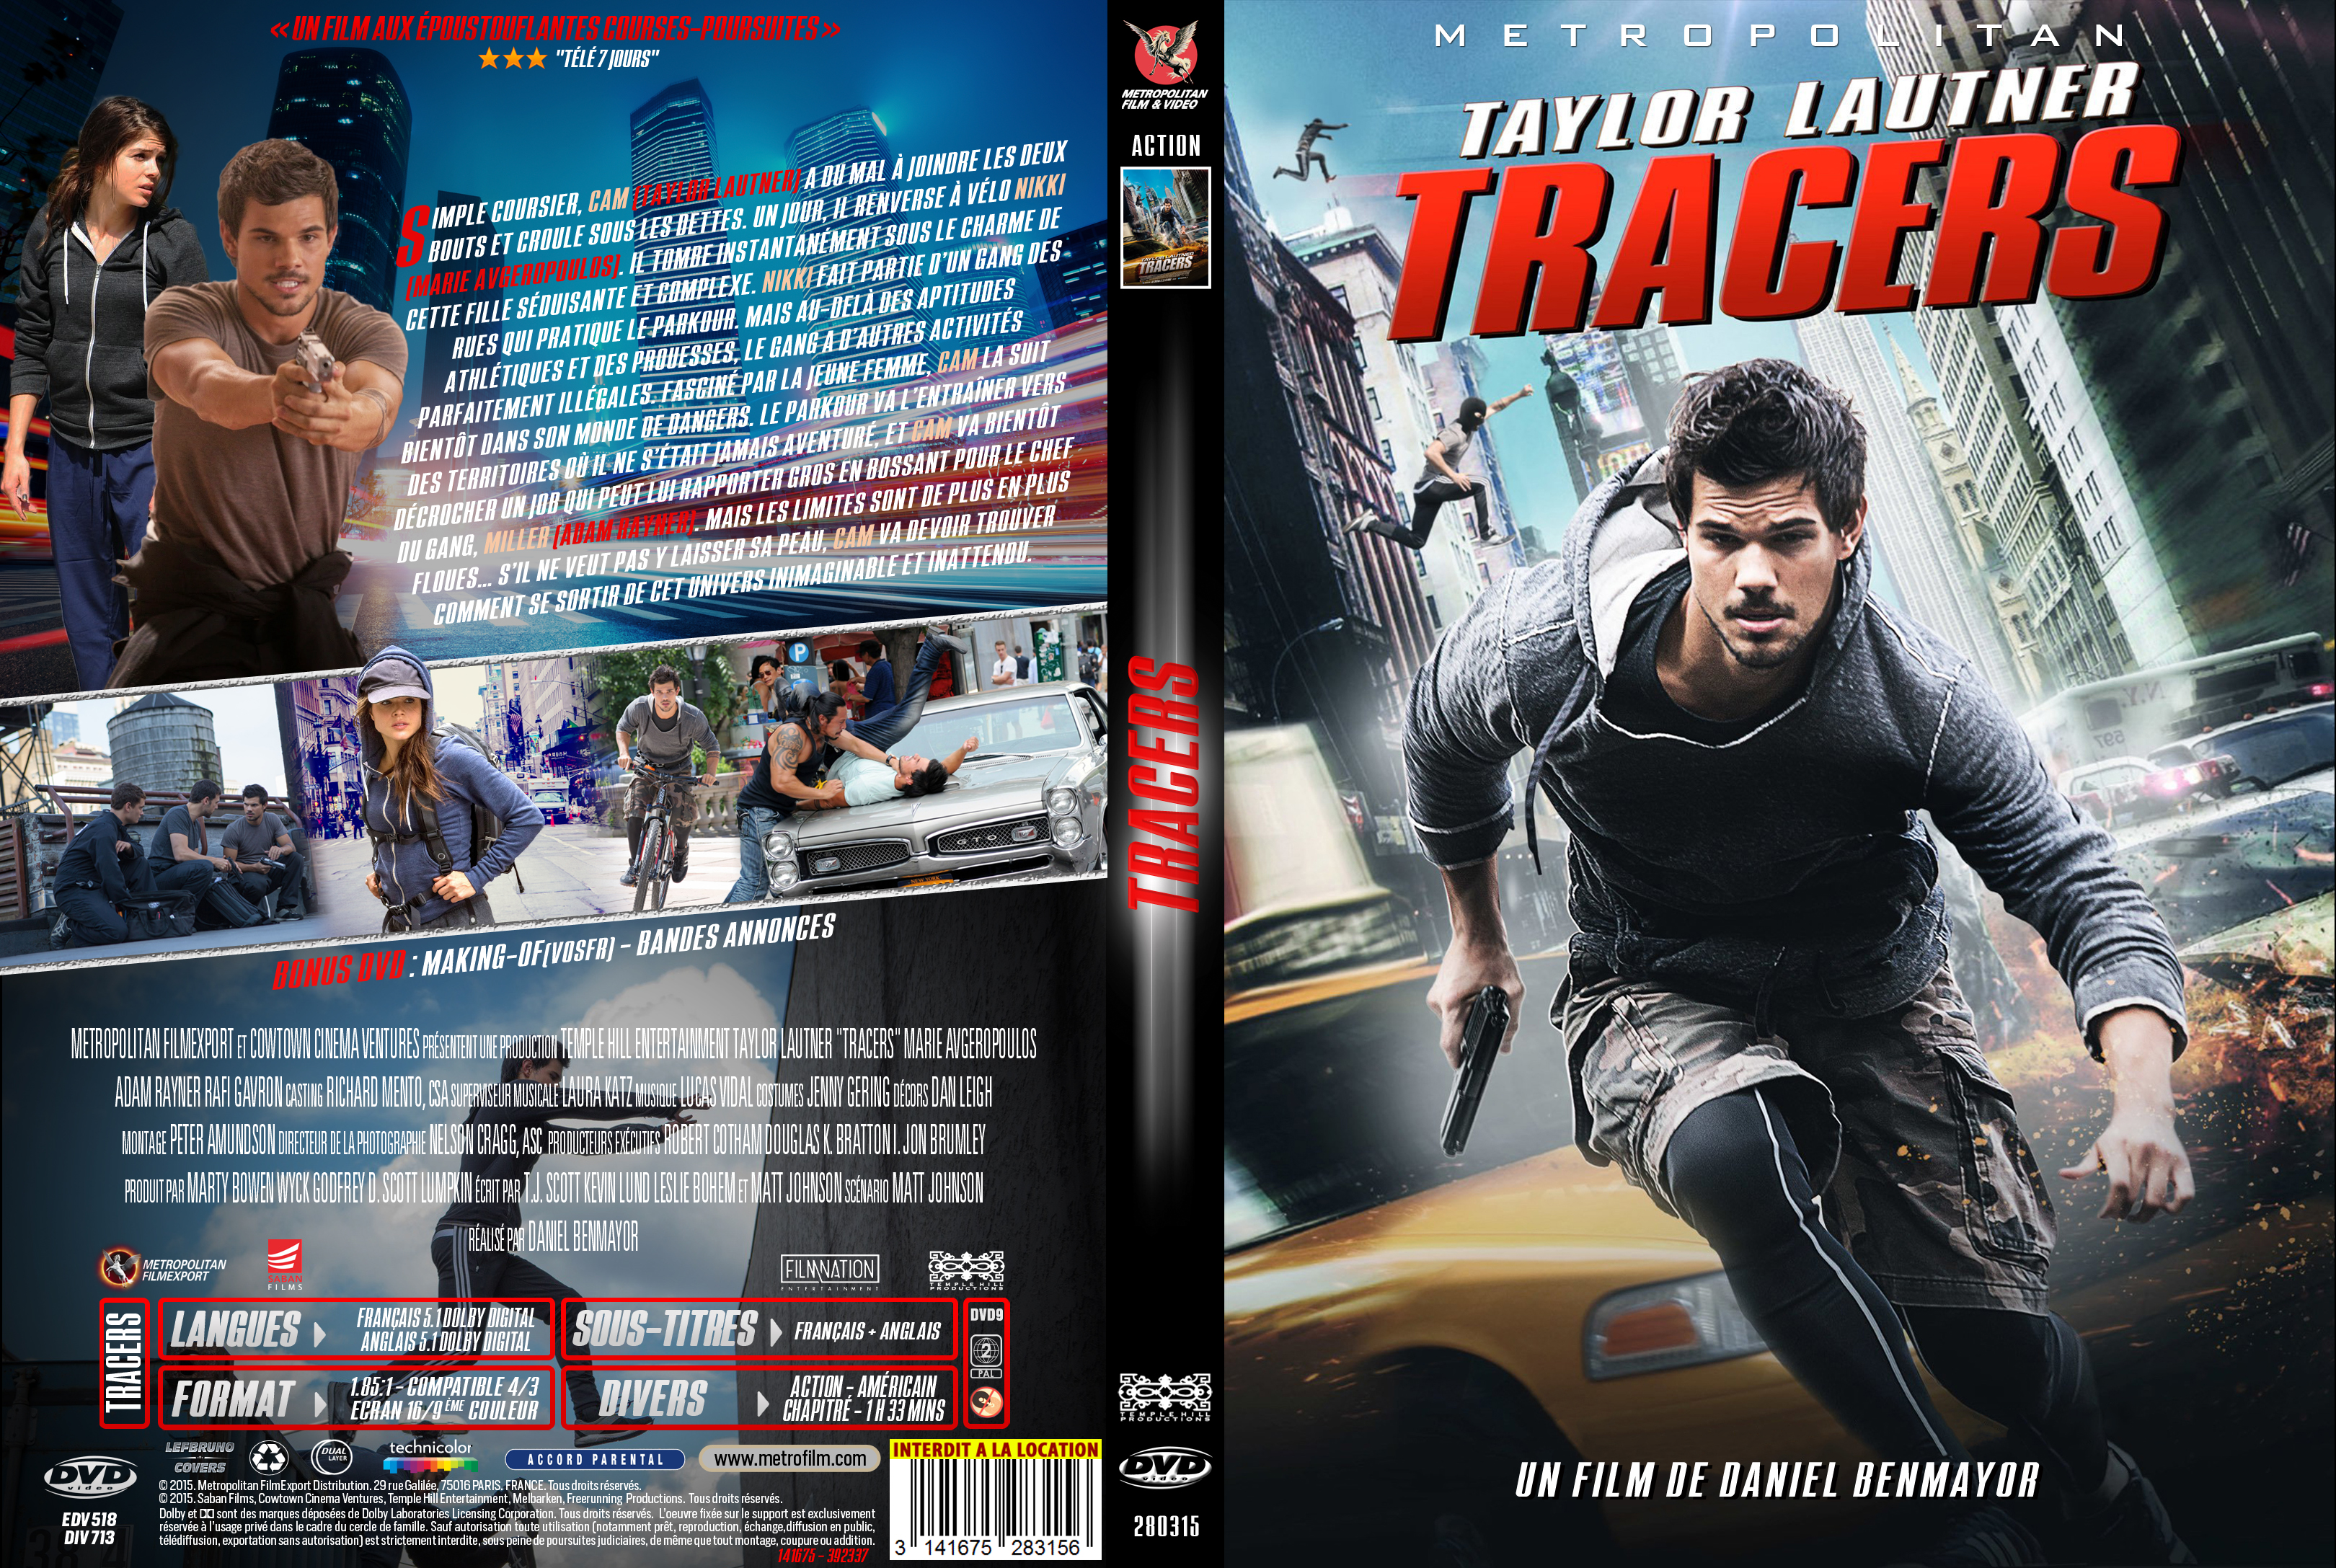 Jaquette DVD Tracers custom